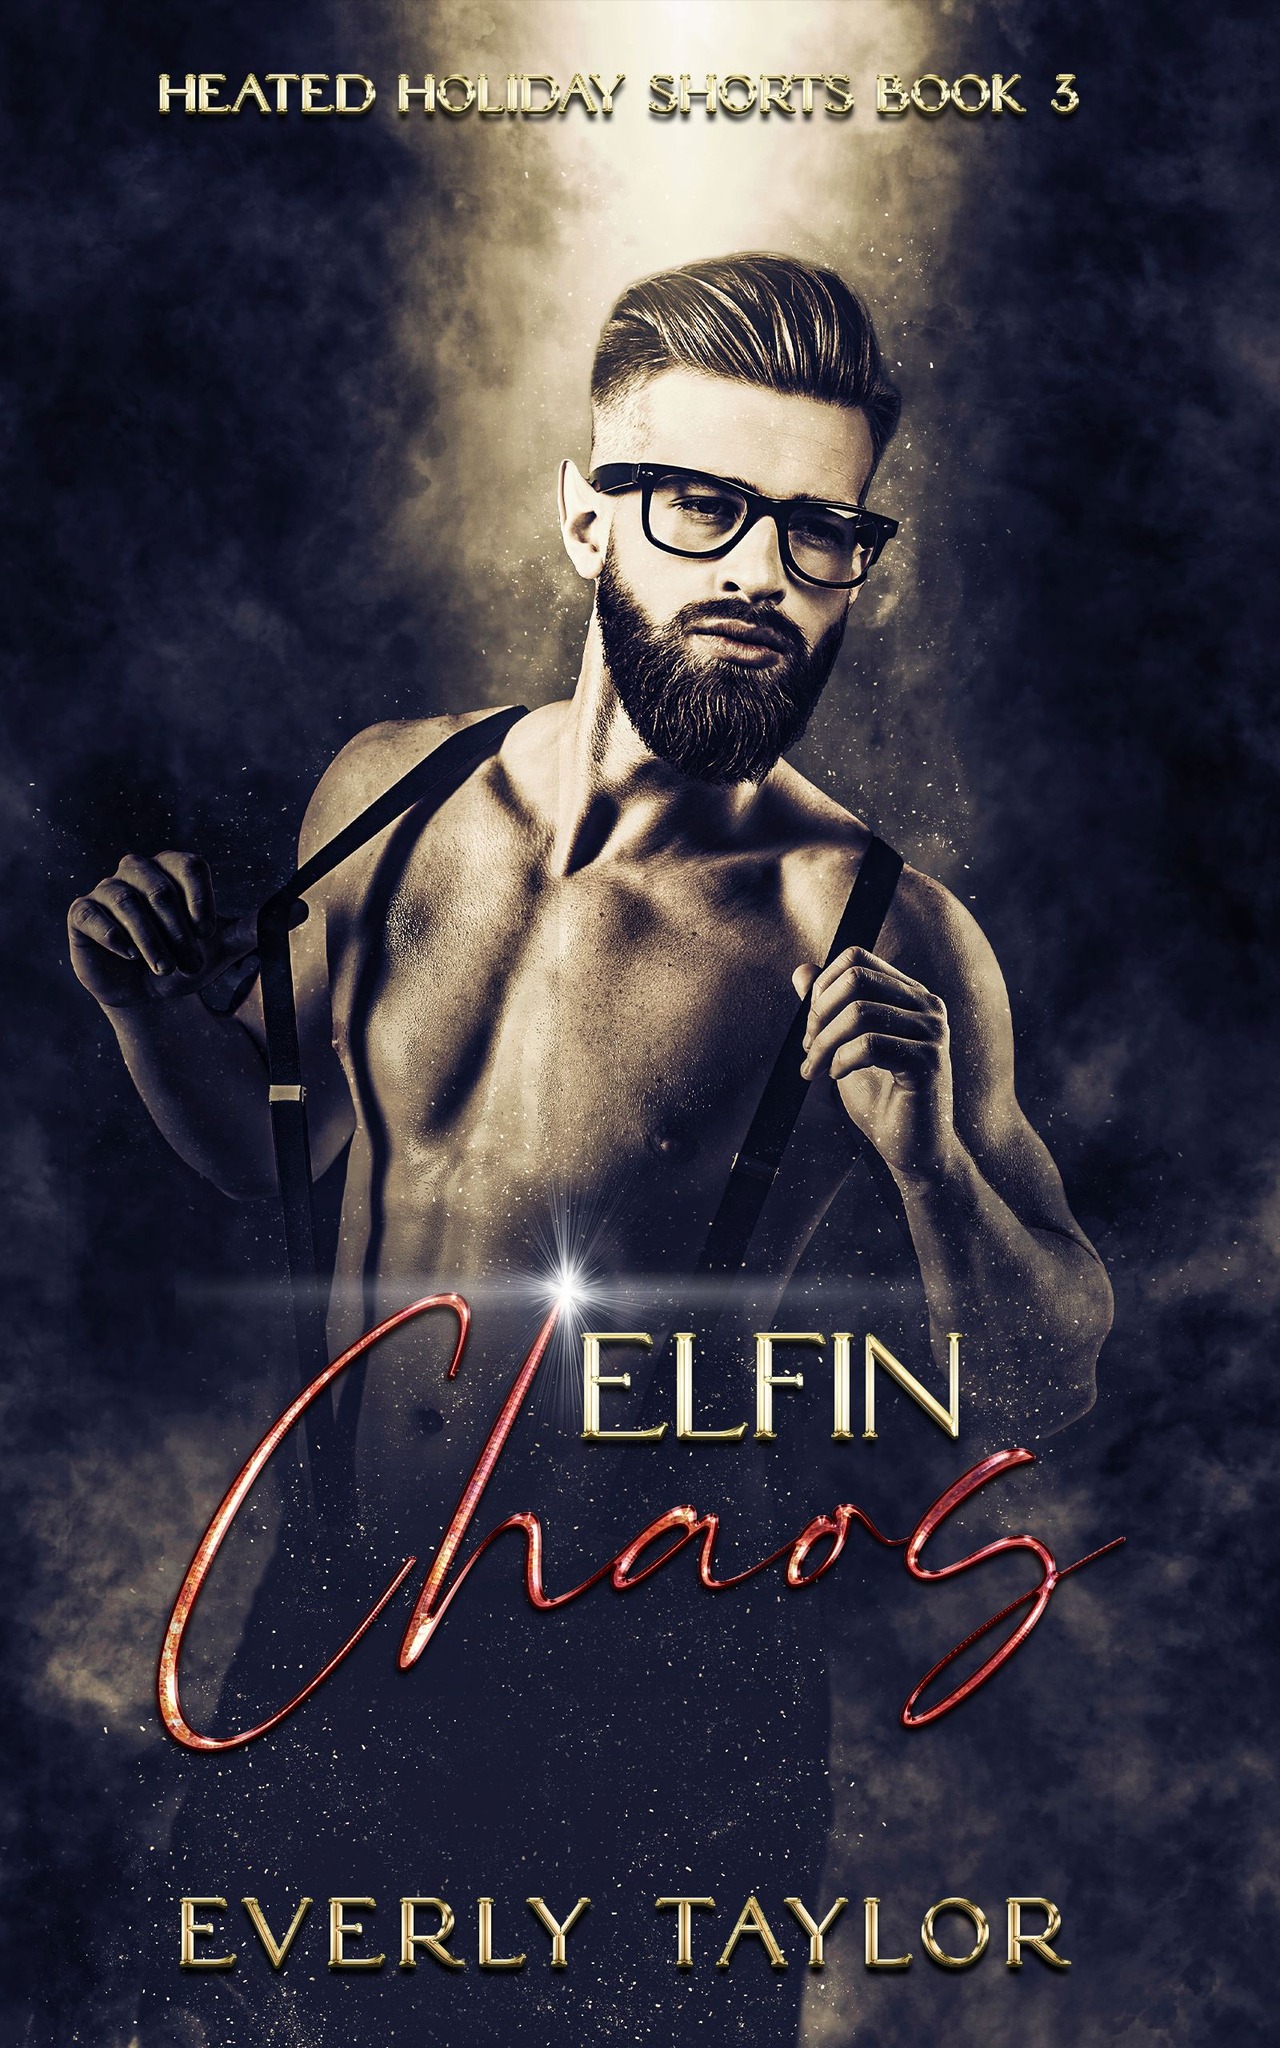 Elfin Chaos by Everly Taylor PDF Download